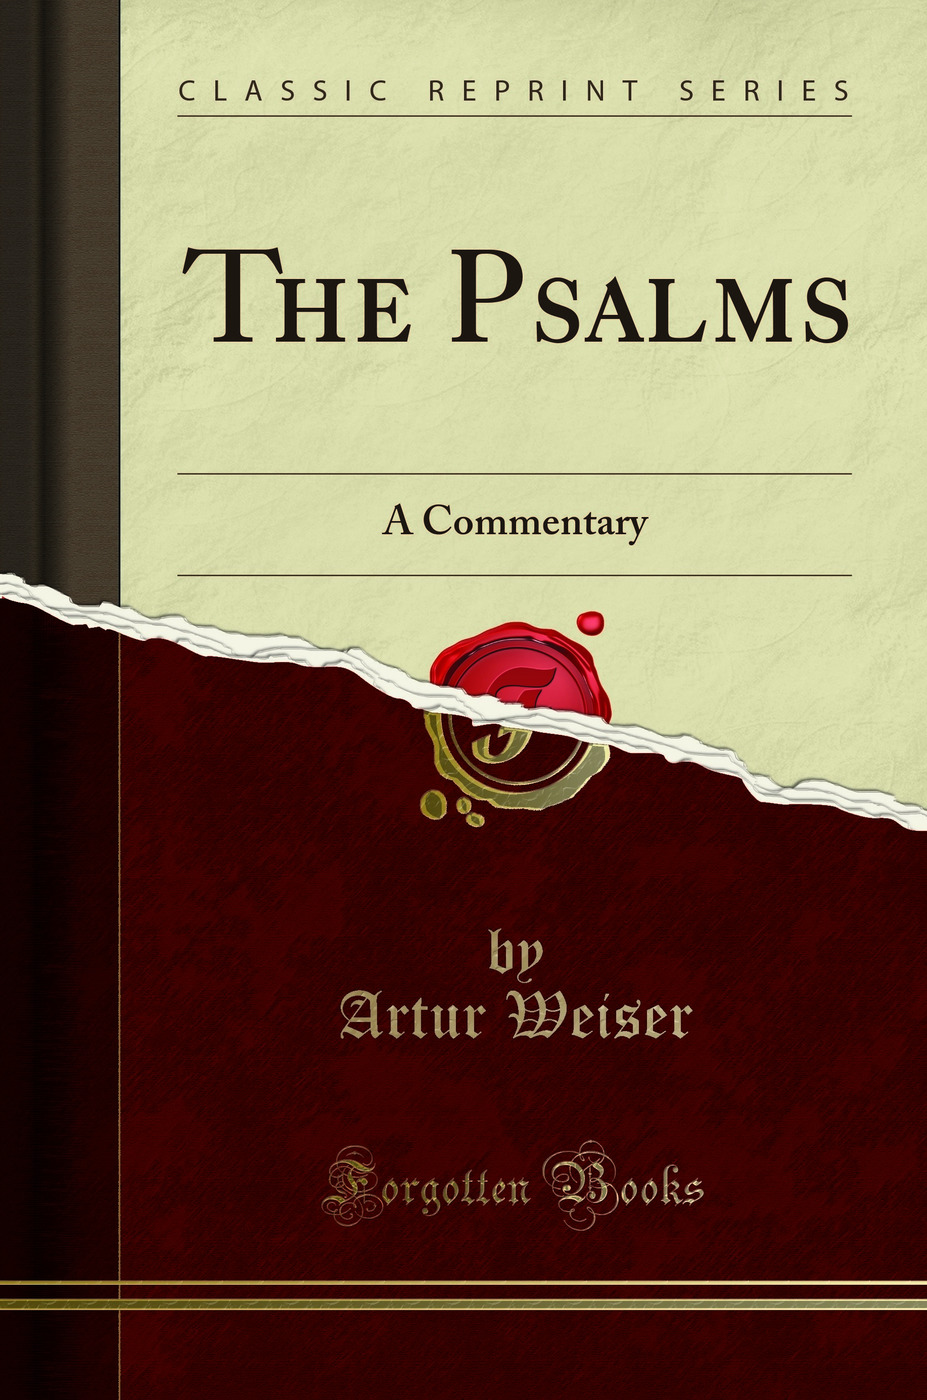 The Psalms: A Commentary (Classic Reprint) - Artur Weiser